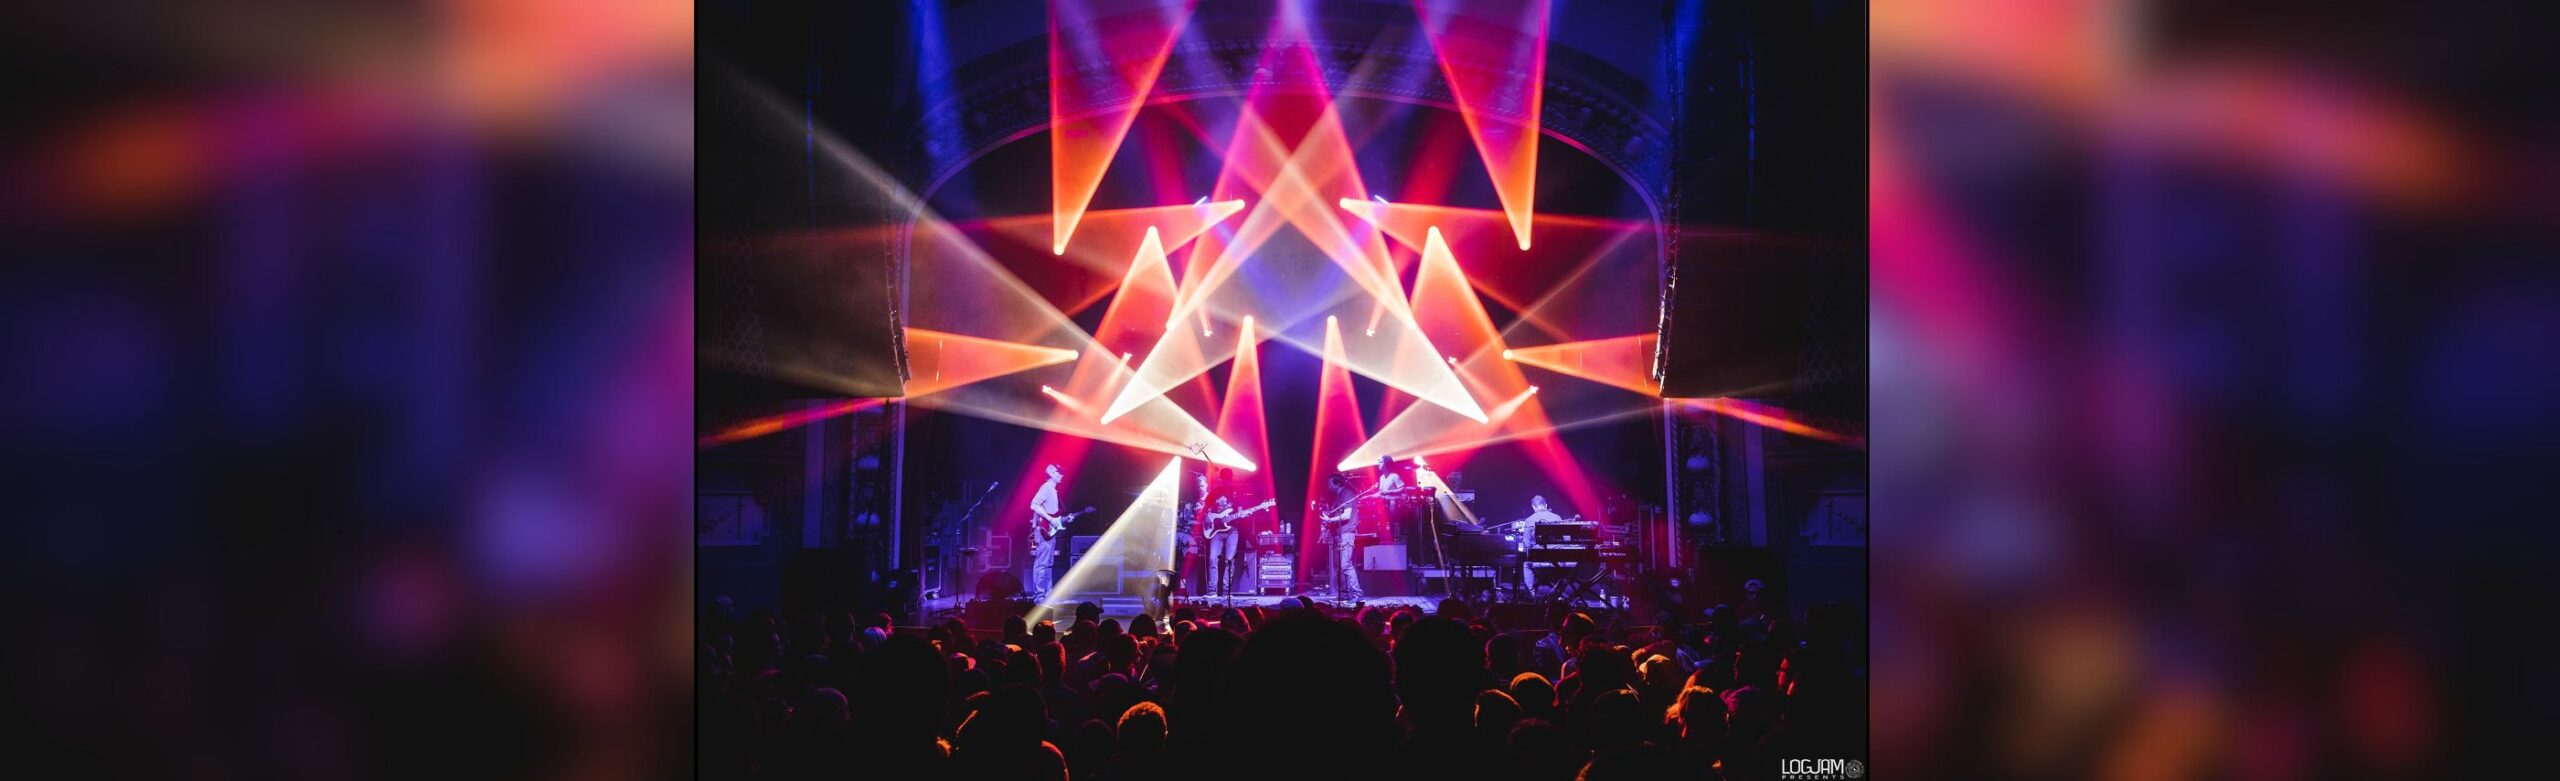 Win Tickets to Umphrey’s McGee in Montana Image